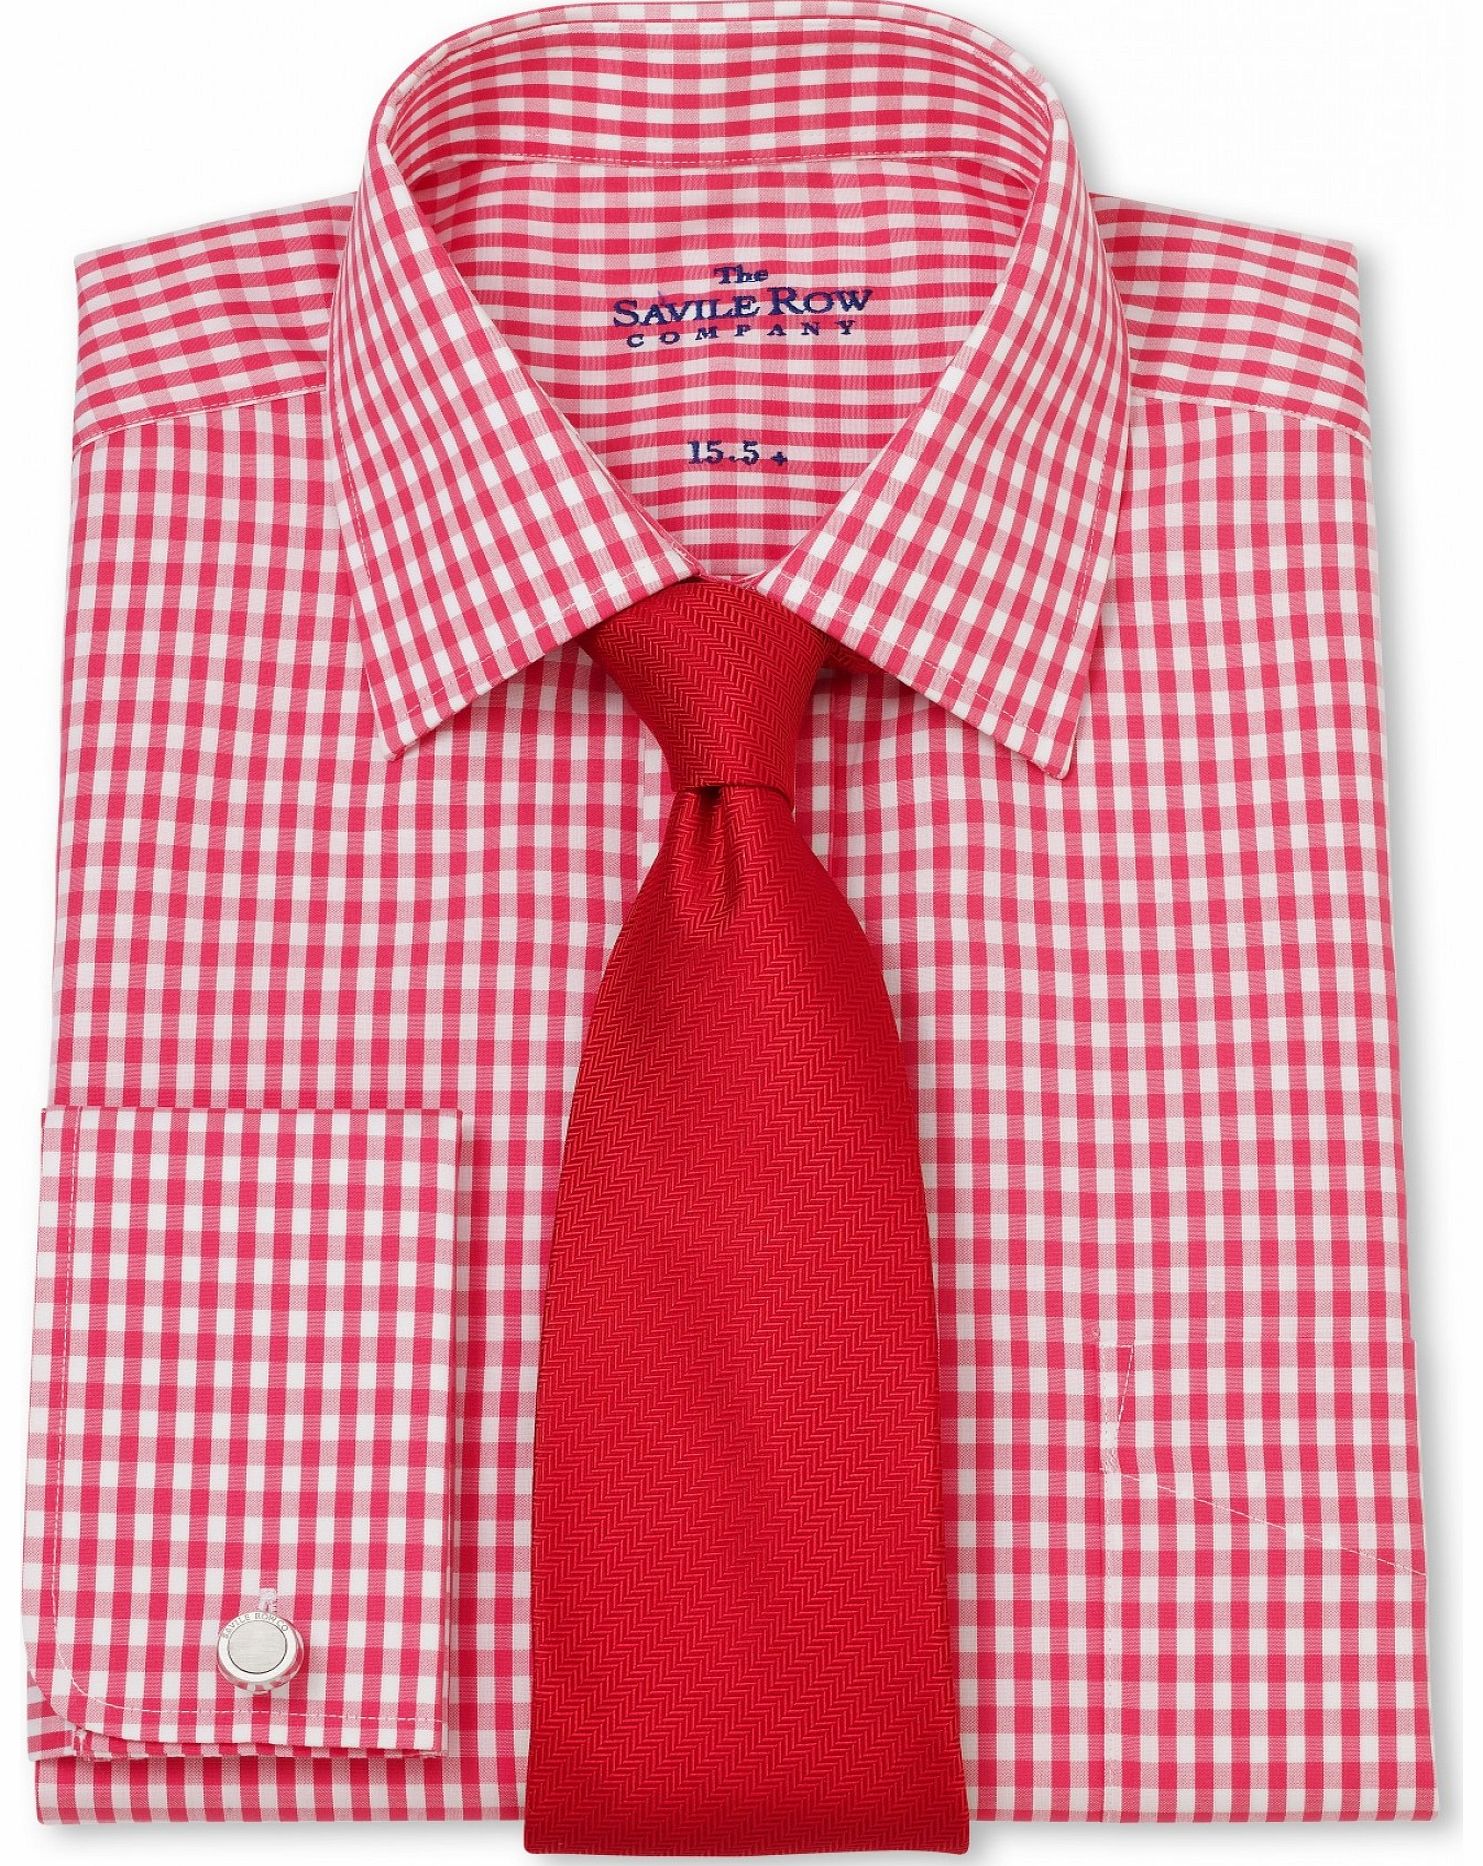 Savile Row Company Pink White Gingham Check Classic Fit Shirt 18